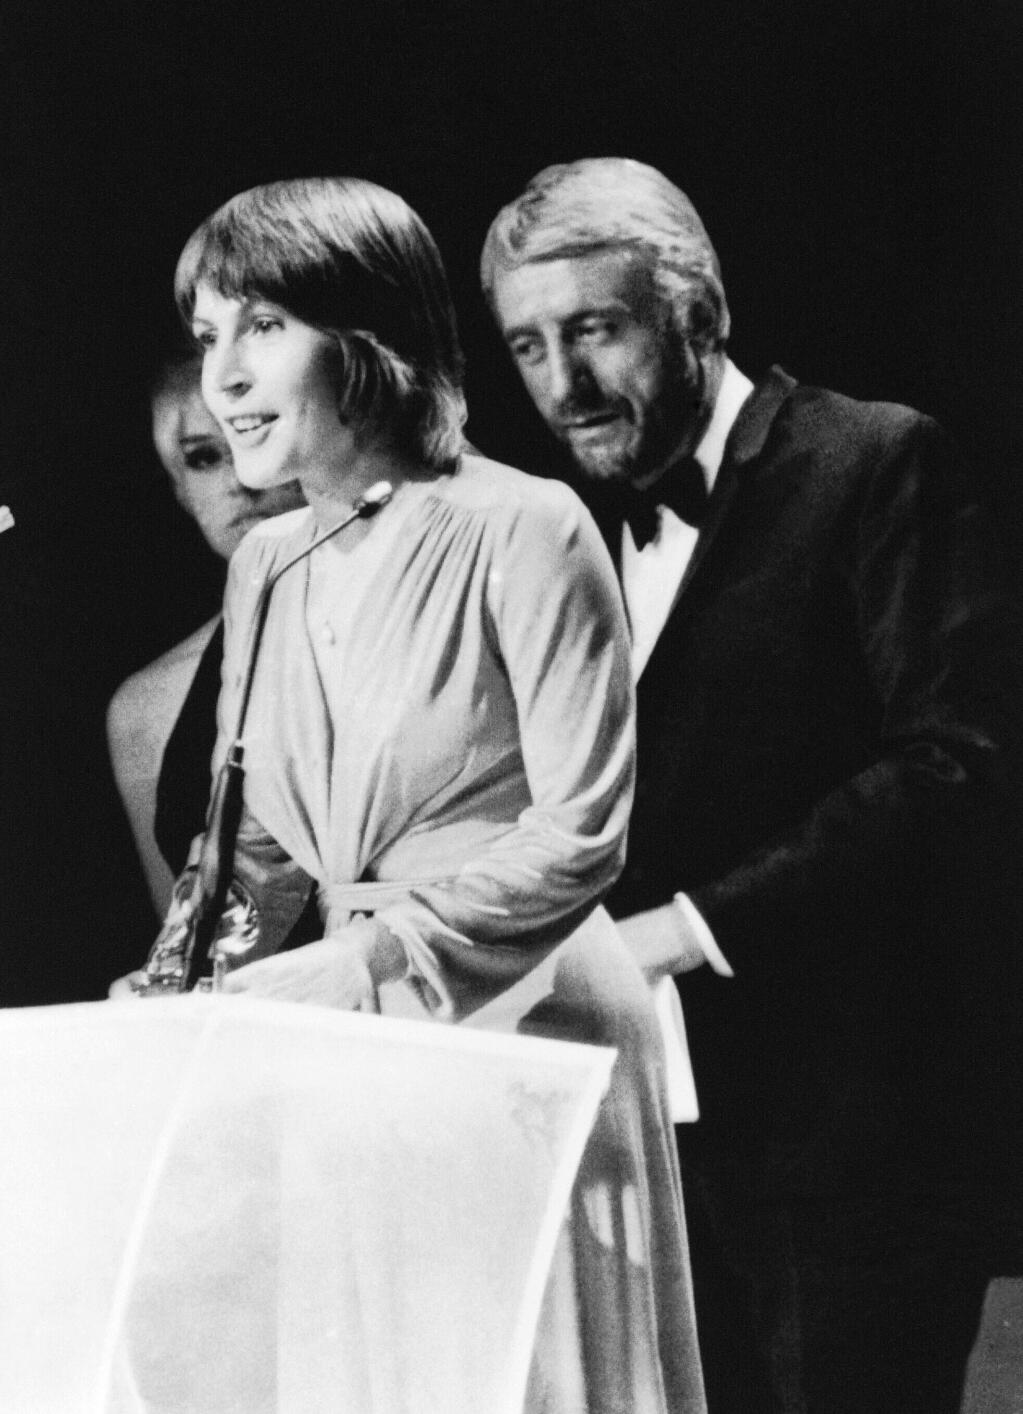 FILE - In this March 3, 1973, file photo, Helen Reddy wins a Grammy Award for the best female song of the year in Nashville, Tenn. Reddy, who gained prominence for her woman's liberation song "I Am Woman," said upon accepting the award, "I'd like to thank God because she made everything possible." Reddy, the Australian-born singer who scored an enduring hit with her feminist anthem “I Am Woman,” has died at 78 in Los Angeles. Reddy’s children announced their mother’s death Tuesday evening, Sept. 29, 2020, saying that while they are heartbroken, they “take comfort in the knowledge that her voice will live on forever.” (AP Photo, File)